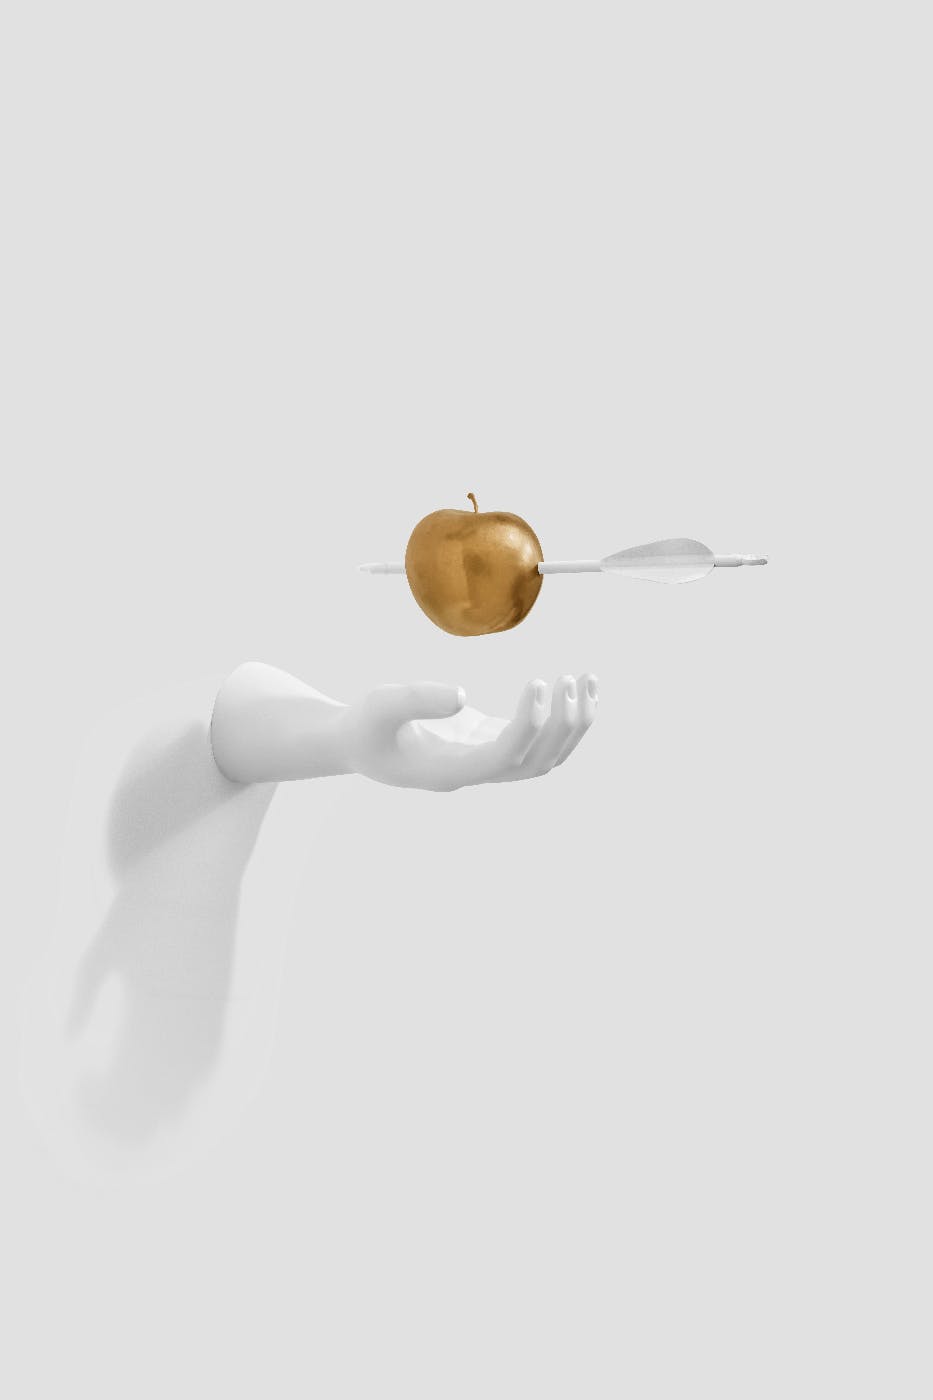 A white plaster had sticking out of a wall with a golden apple with an arrow through it hovering above it.